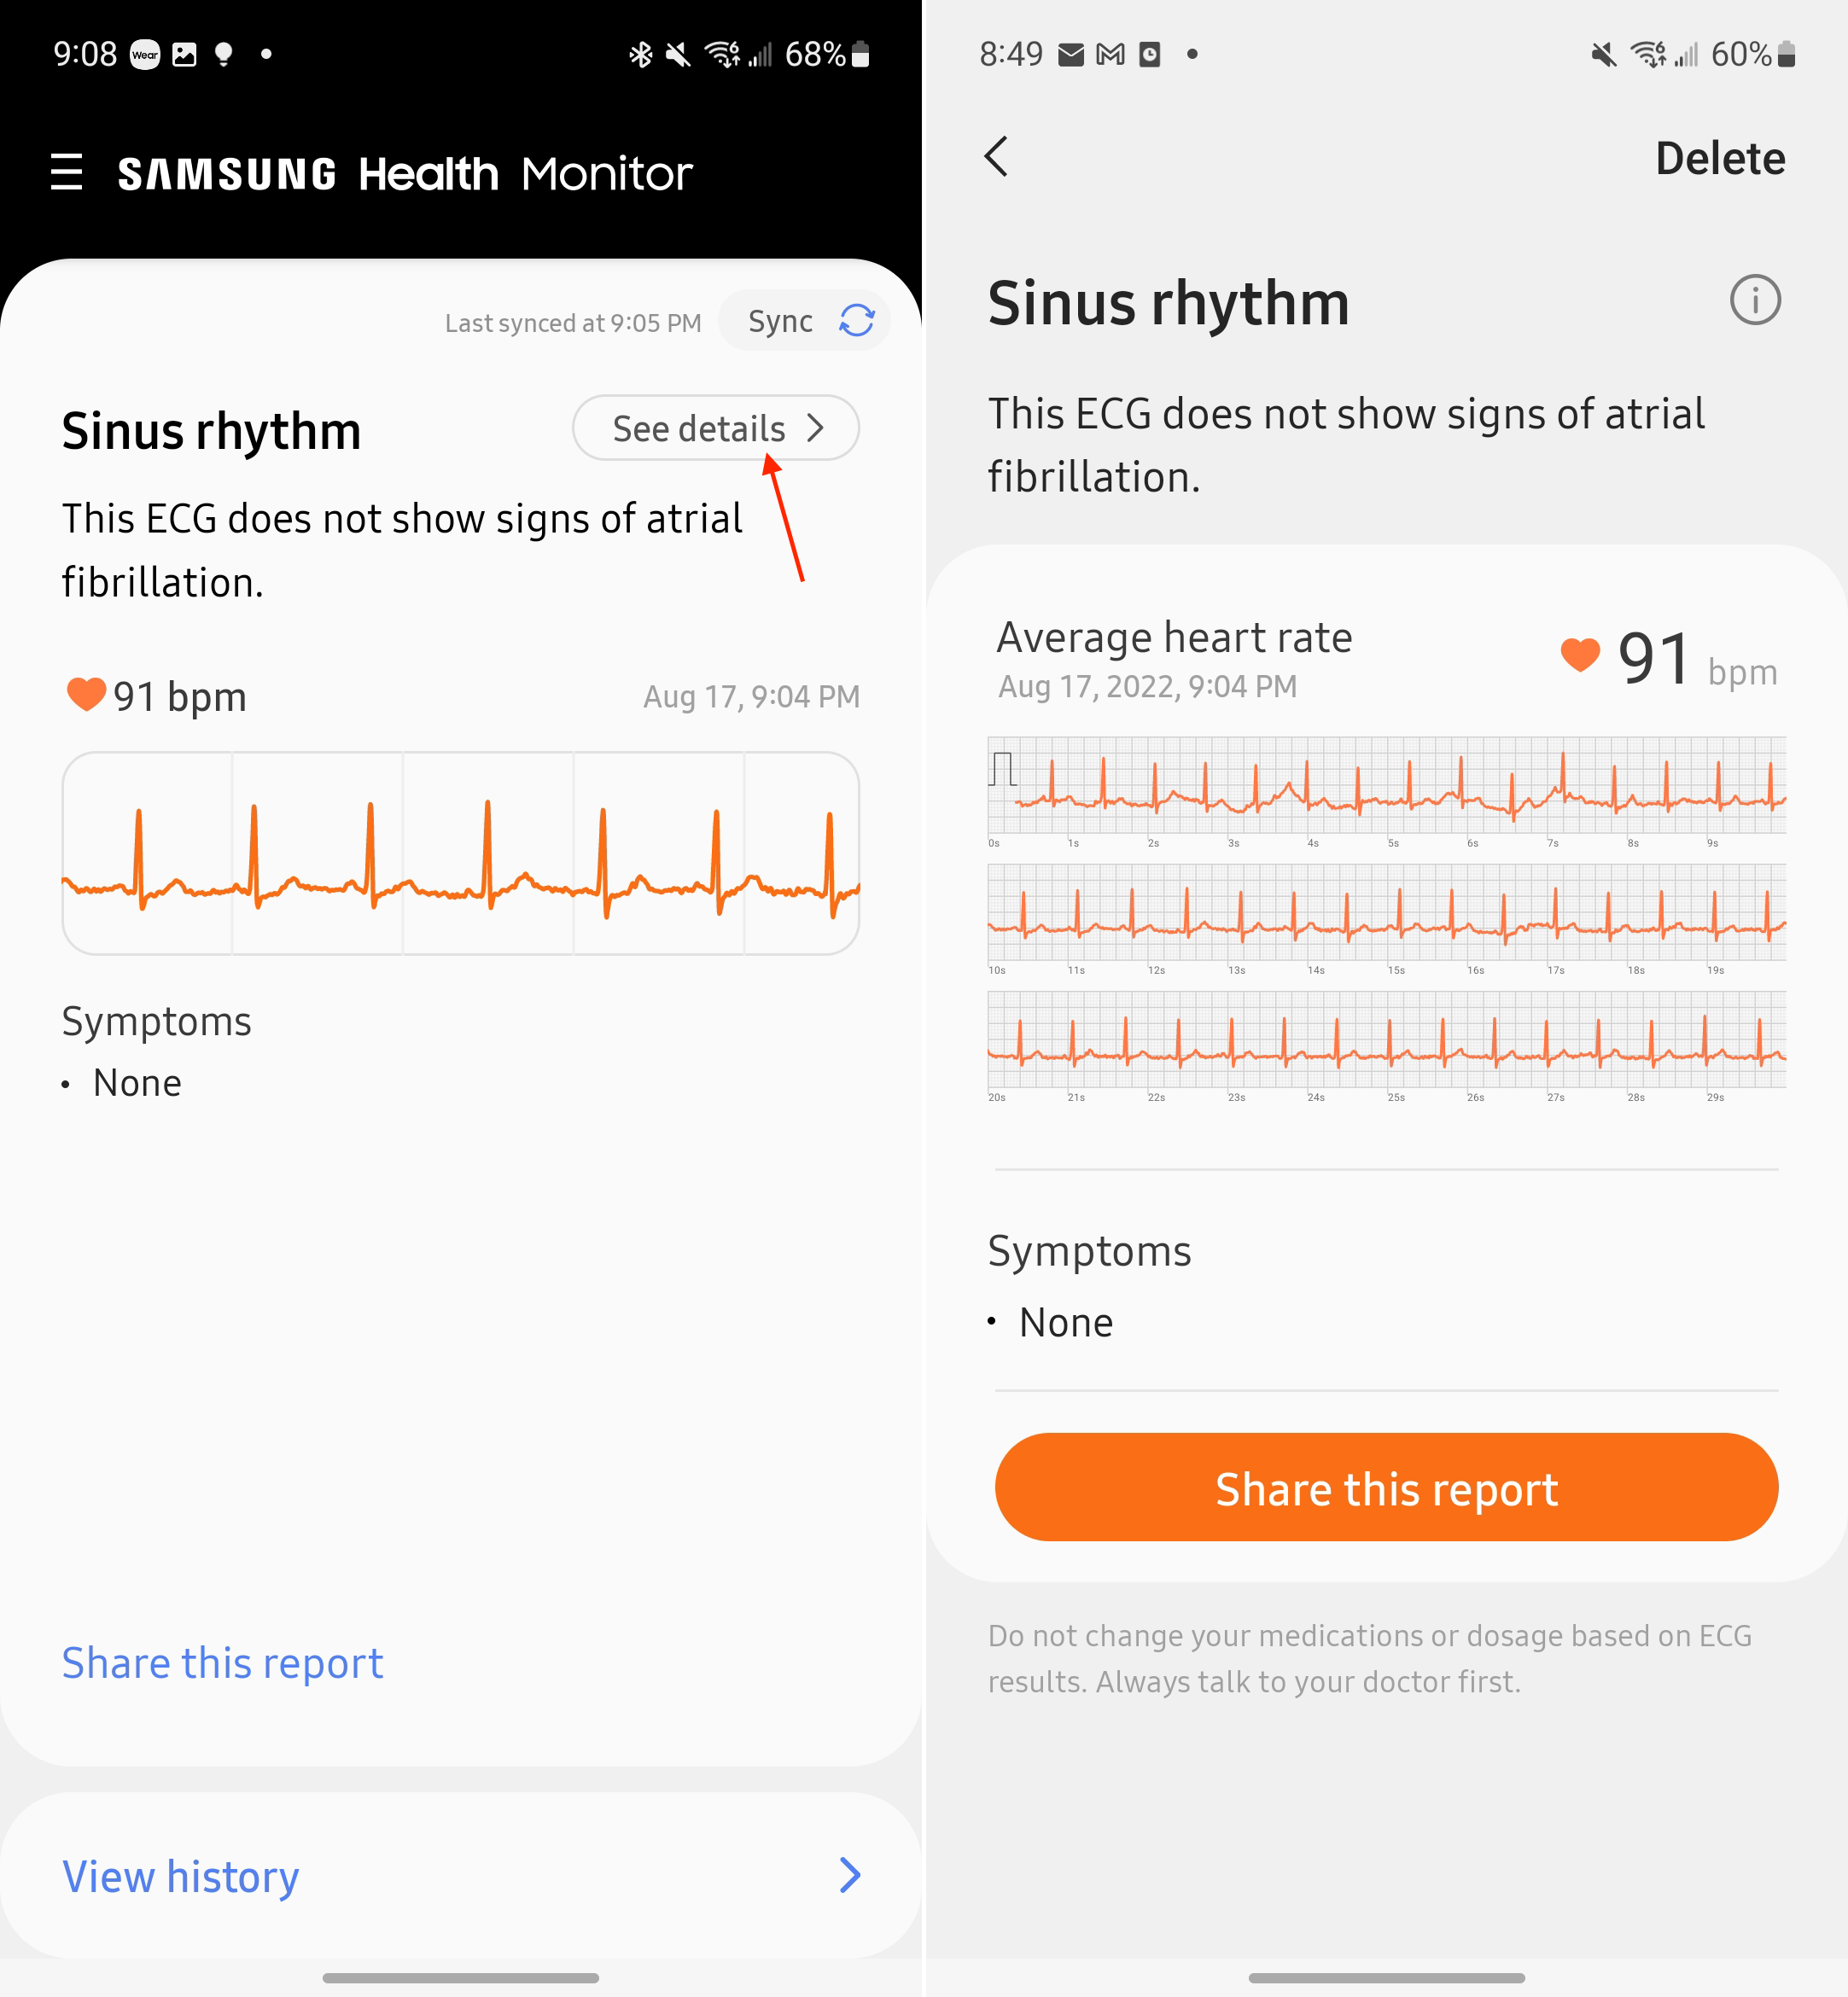 View ECG results in the Samsung Health Monitor app